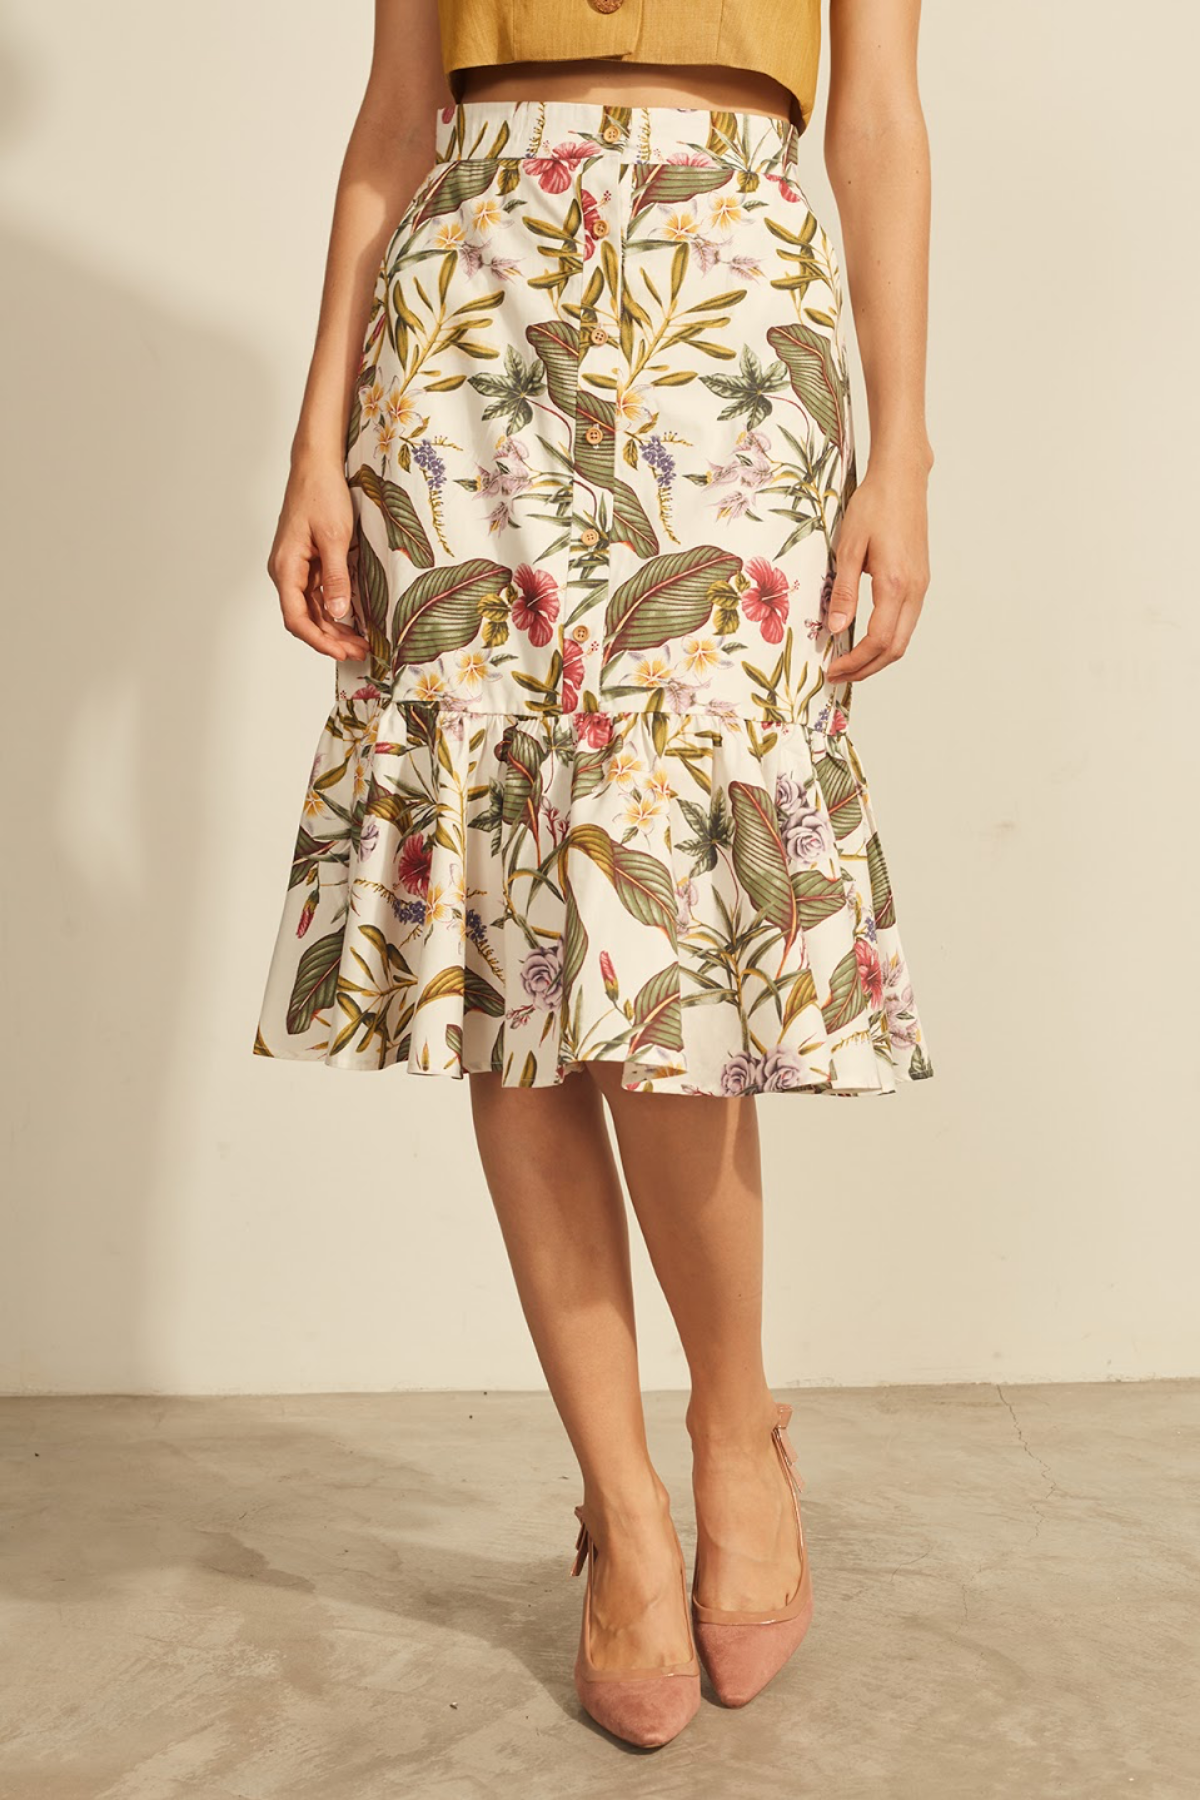 Lily & Lou Louise Skirt in Floral, available in ZERRIN